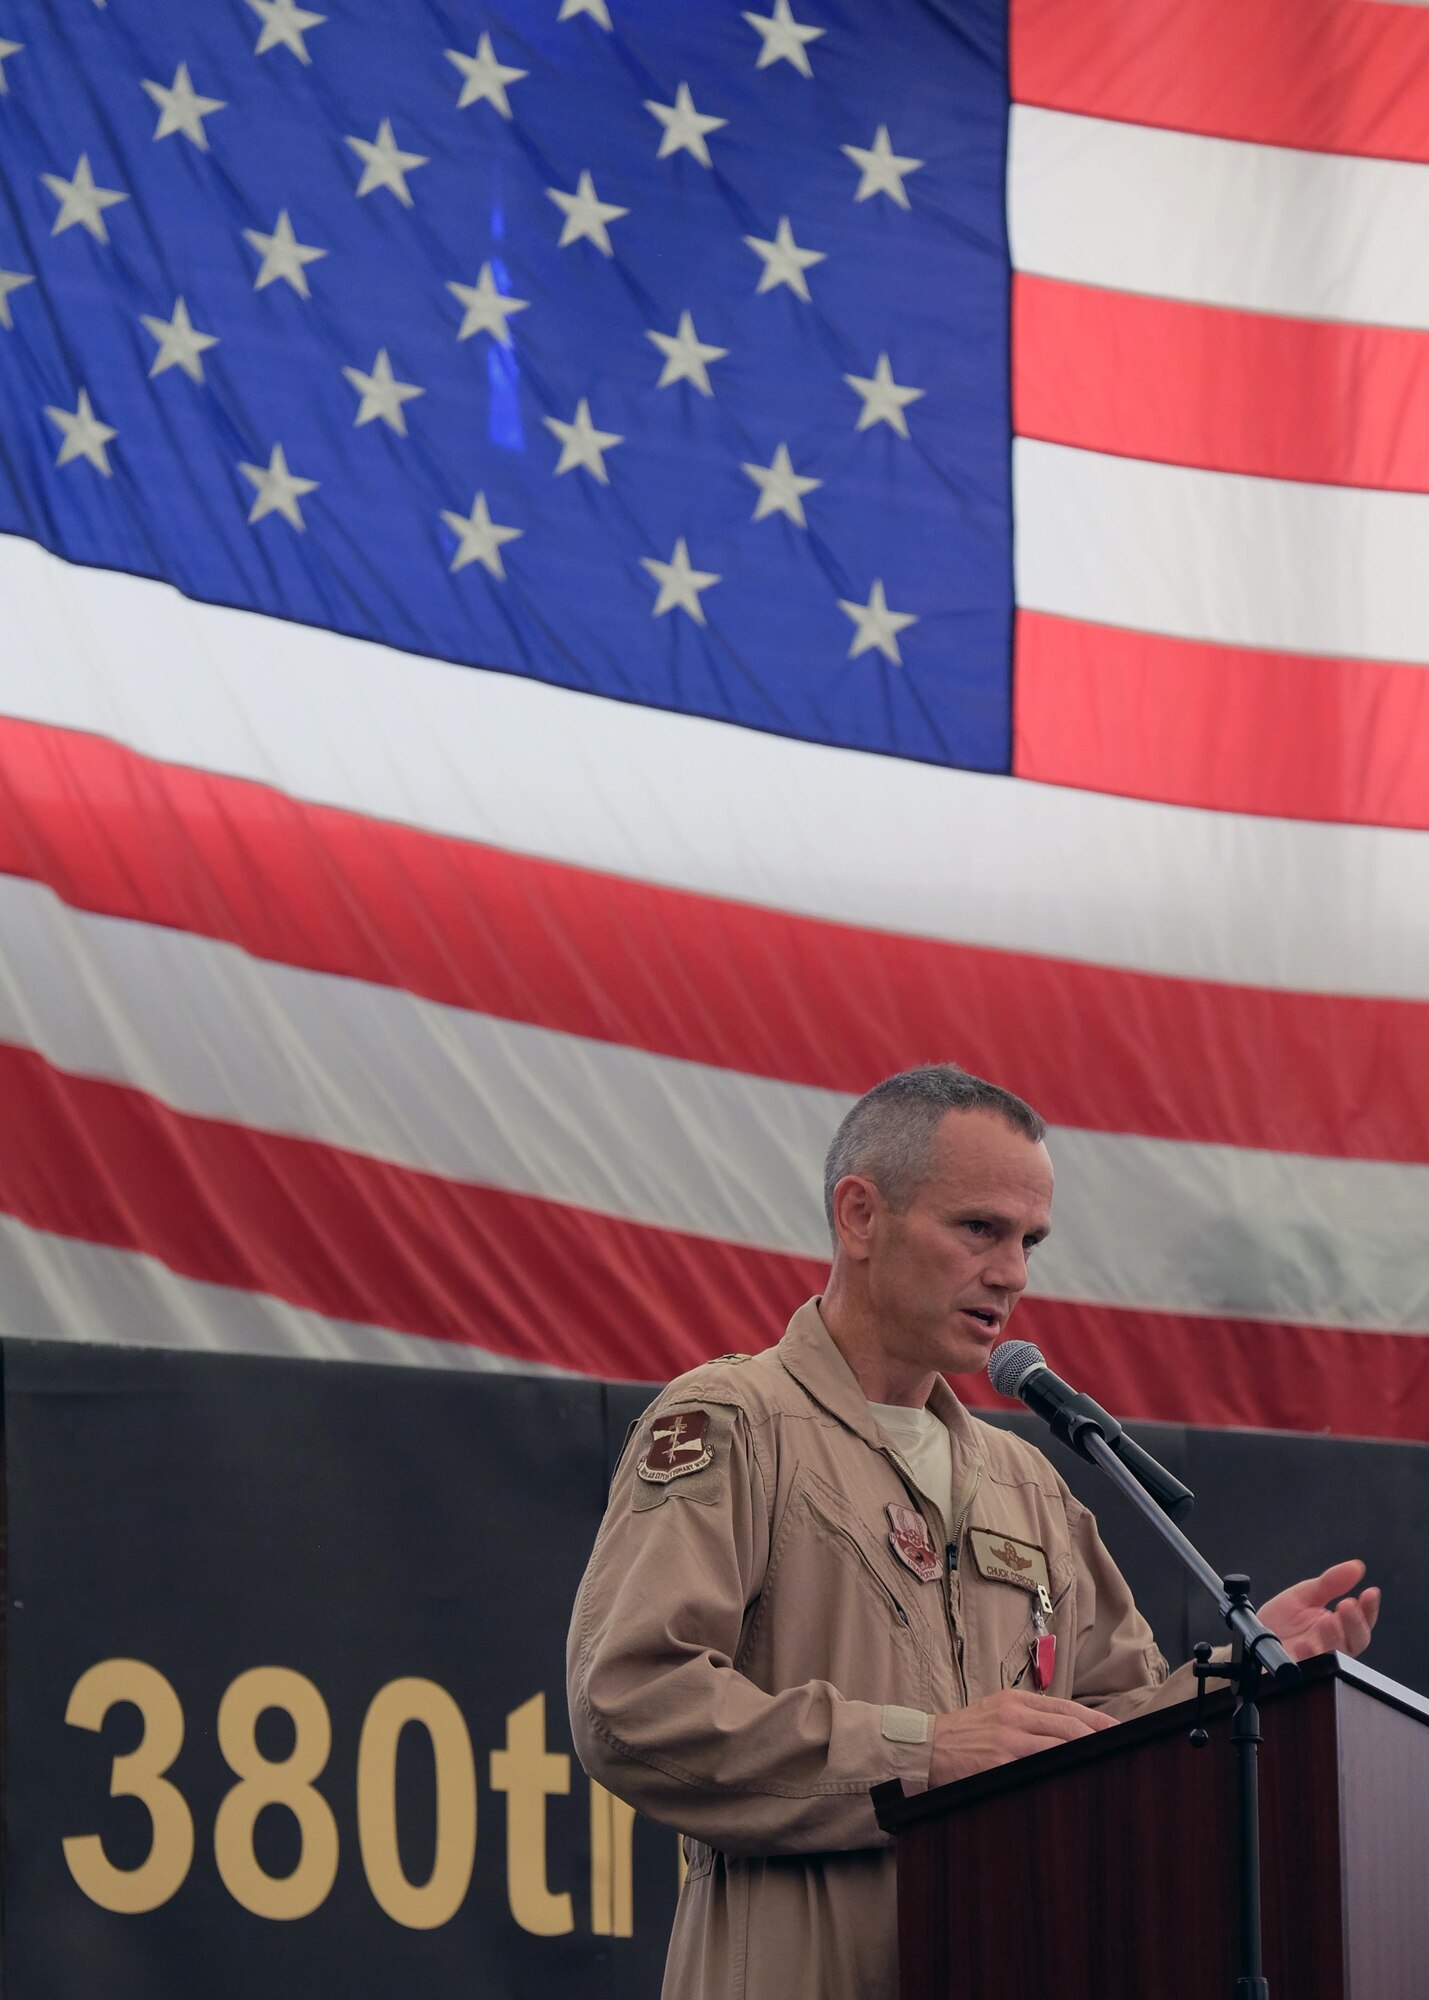 Brig. Gen. Charles S. Corcoran, outgoing 380th Air Expeditionary commander, speaks to Airmen during a change of command ceremony July 1, 2017, at an undisclosed location in southwest Asia. Corcoran — a command pilot with more than 3,000 flying hours — is slated to assume Deputy Chief of Staff for NATO Air Operations at Ramstein, Germany, at Allied Air Command Headquarters, Ramstein, Germany. (U.S. Air Force photo by Senior Airman Preston Webb)